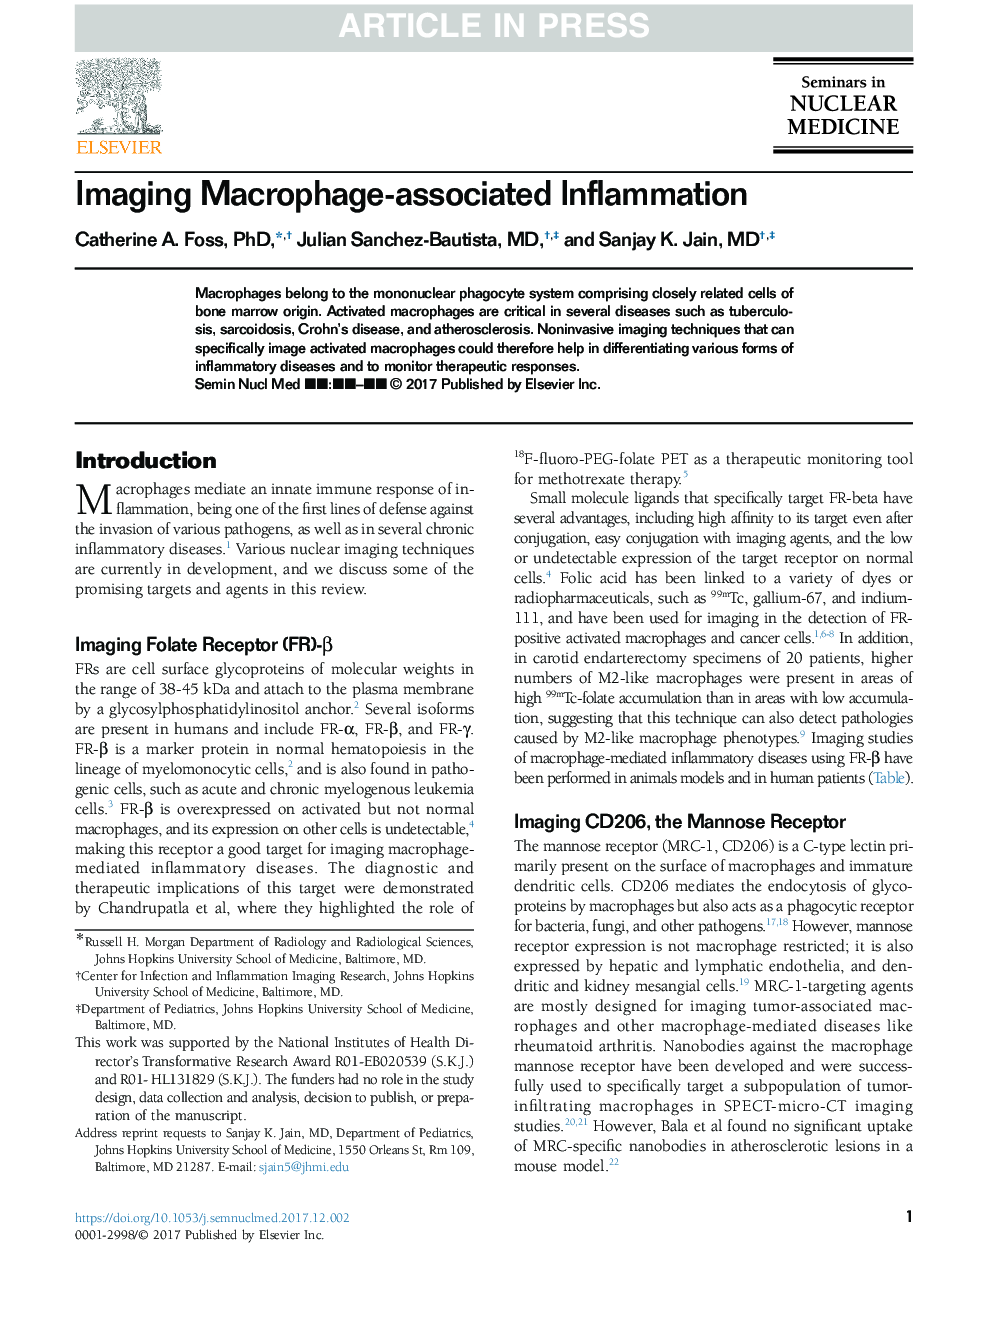 Imaging Macrophage-associated Inflammation